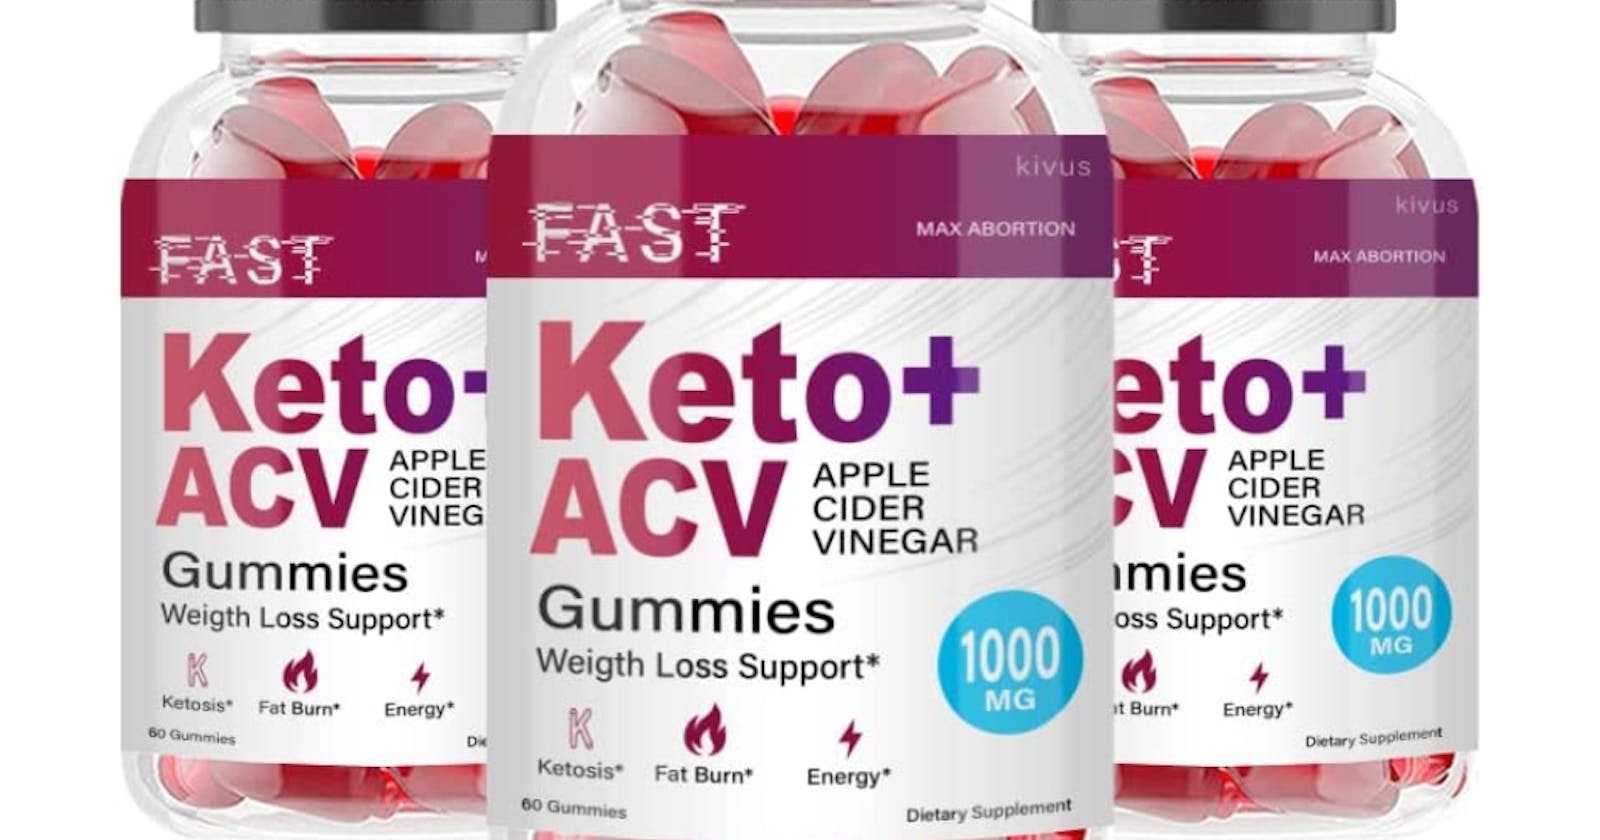 Pure Fast Keto + ACV Gummies: Price, Safe & Effective To Use?